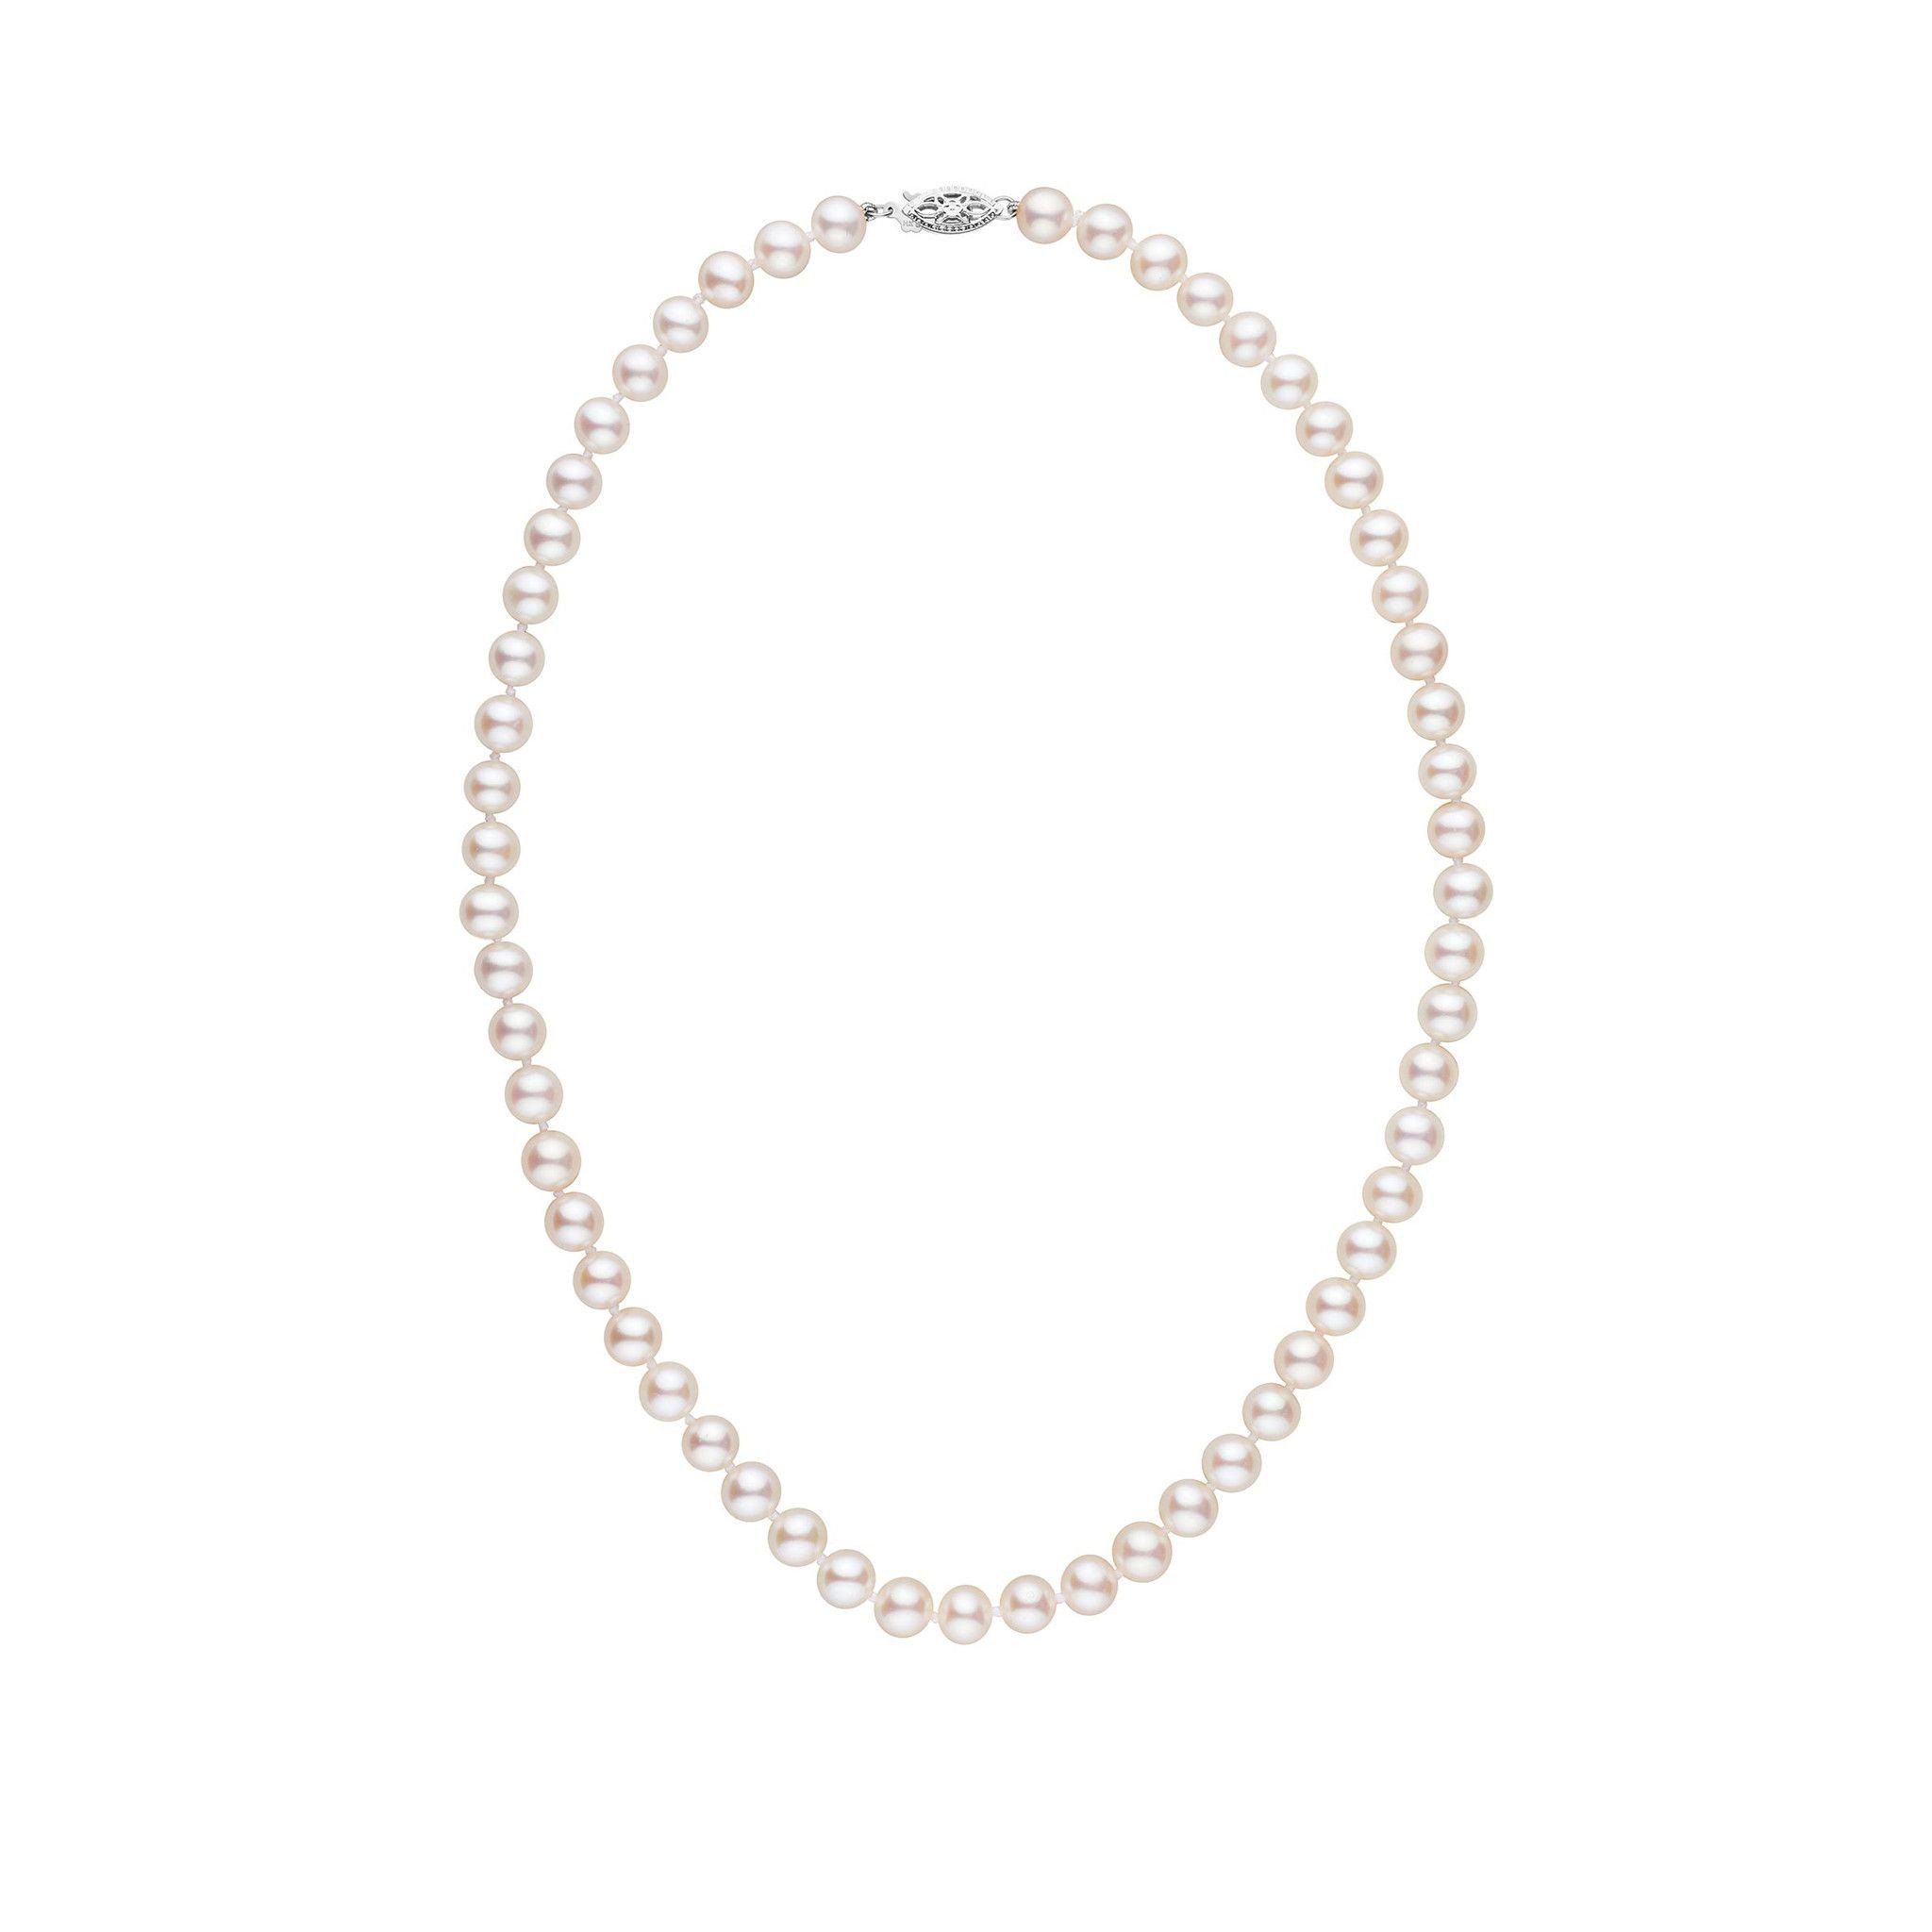 6.5-7.0 mm 16 Inch AA+ White Freshwater Pearl Necklace